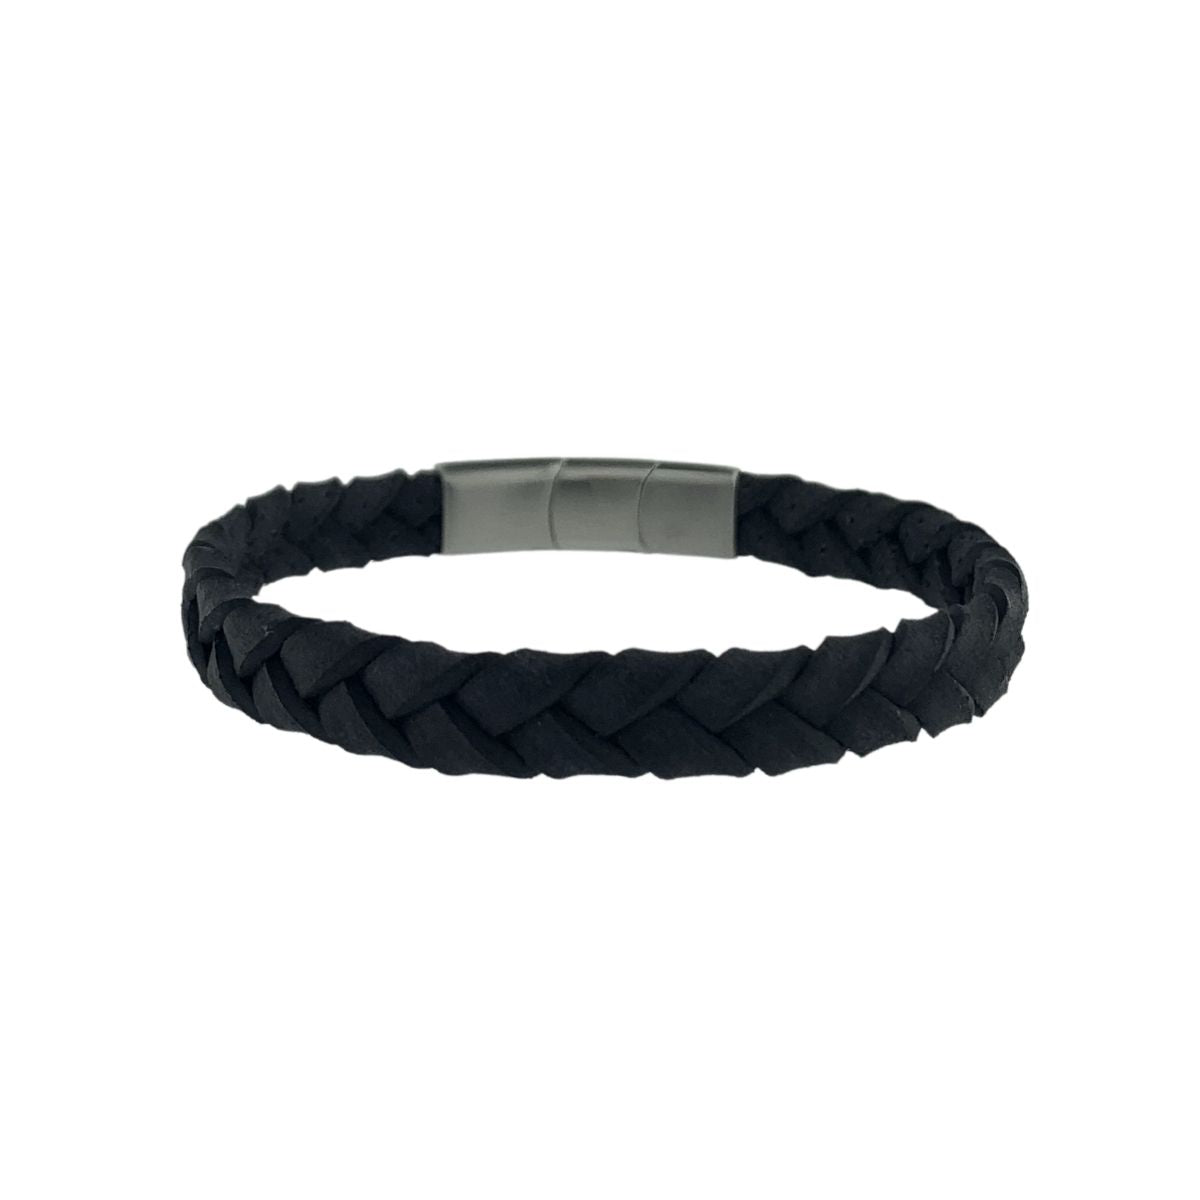 BRAIDED BLACK LEATHER BRACELET WITH MAGNETIC CLOSURE